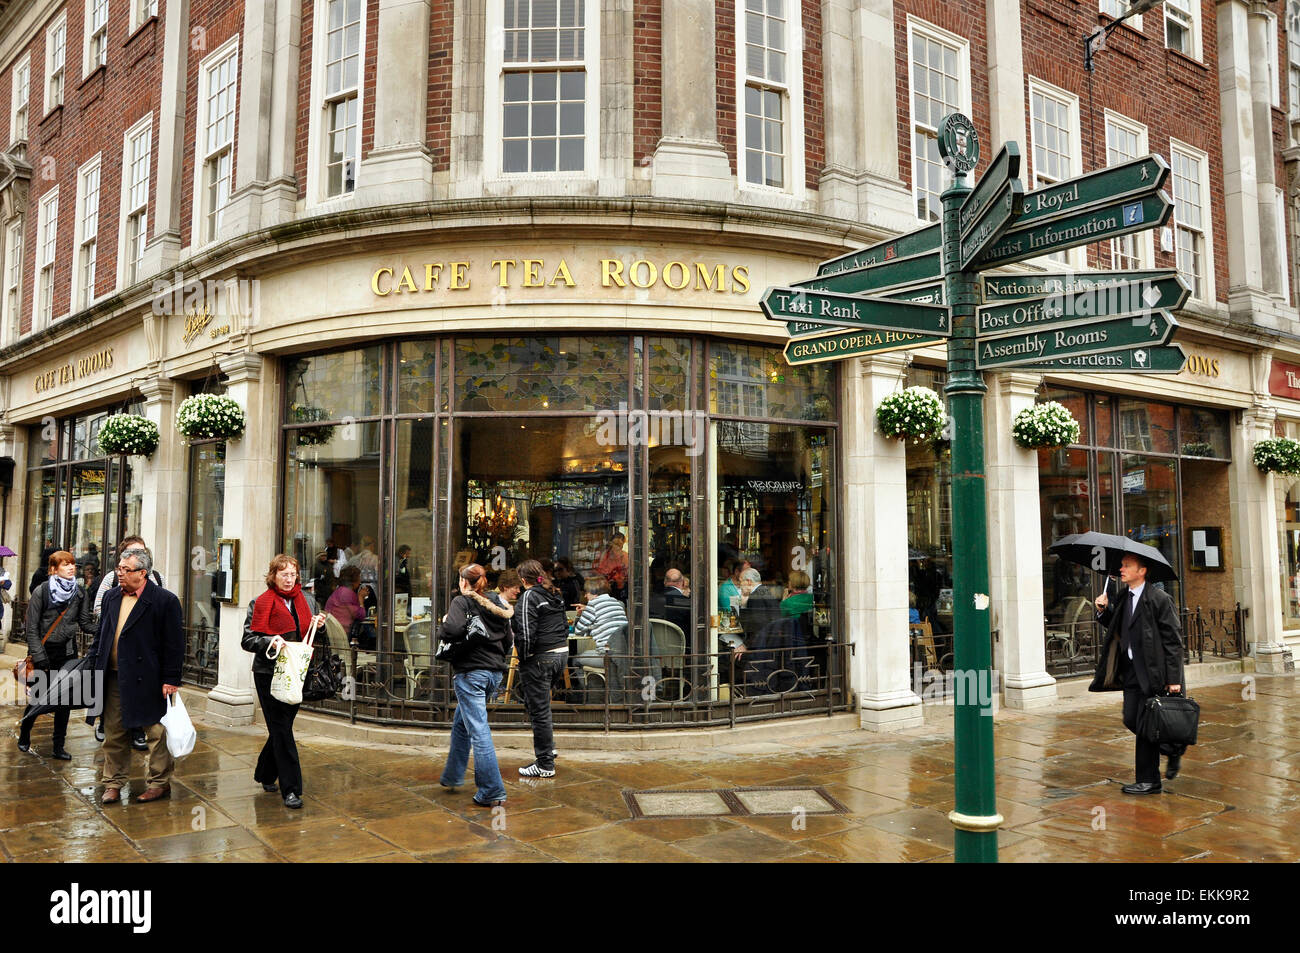 YORK, UNITED KINGDOM - APRIL 2010: Rainy day in York, England. The famous Betty's Tea Rooms at Helenas Square in York, UK Stock Photo